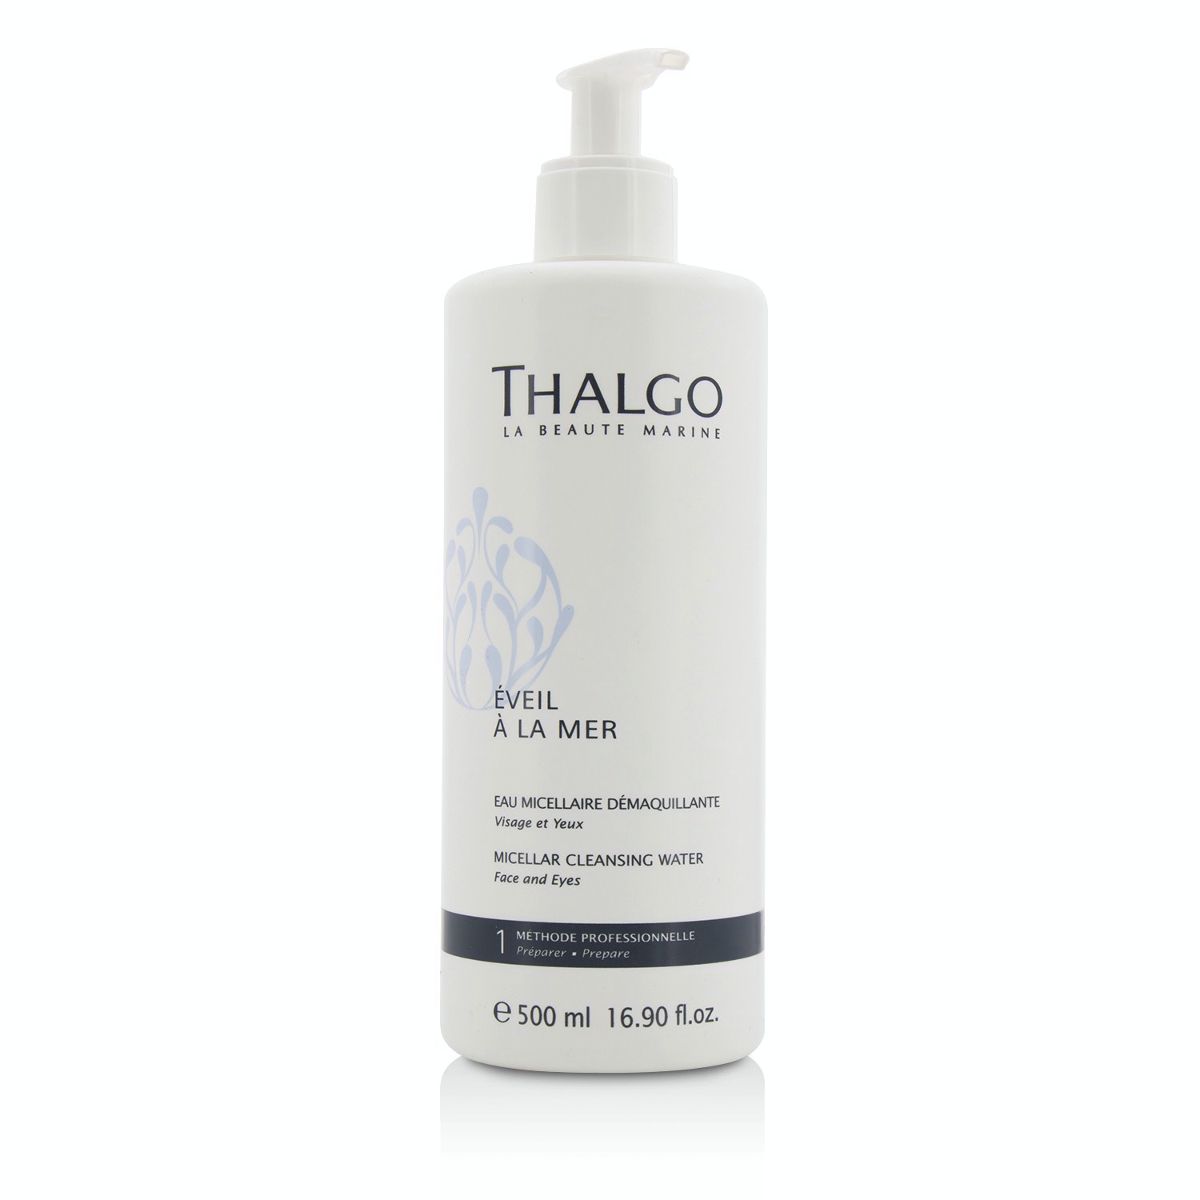 Eveil A La Mer Micellar Cleansing Water (Face  Eyes) - For All Skin Types Even Sensitive Skin (Salon Size) Thalgo Image